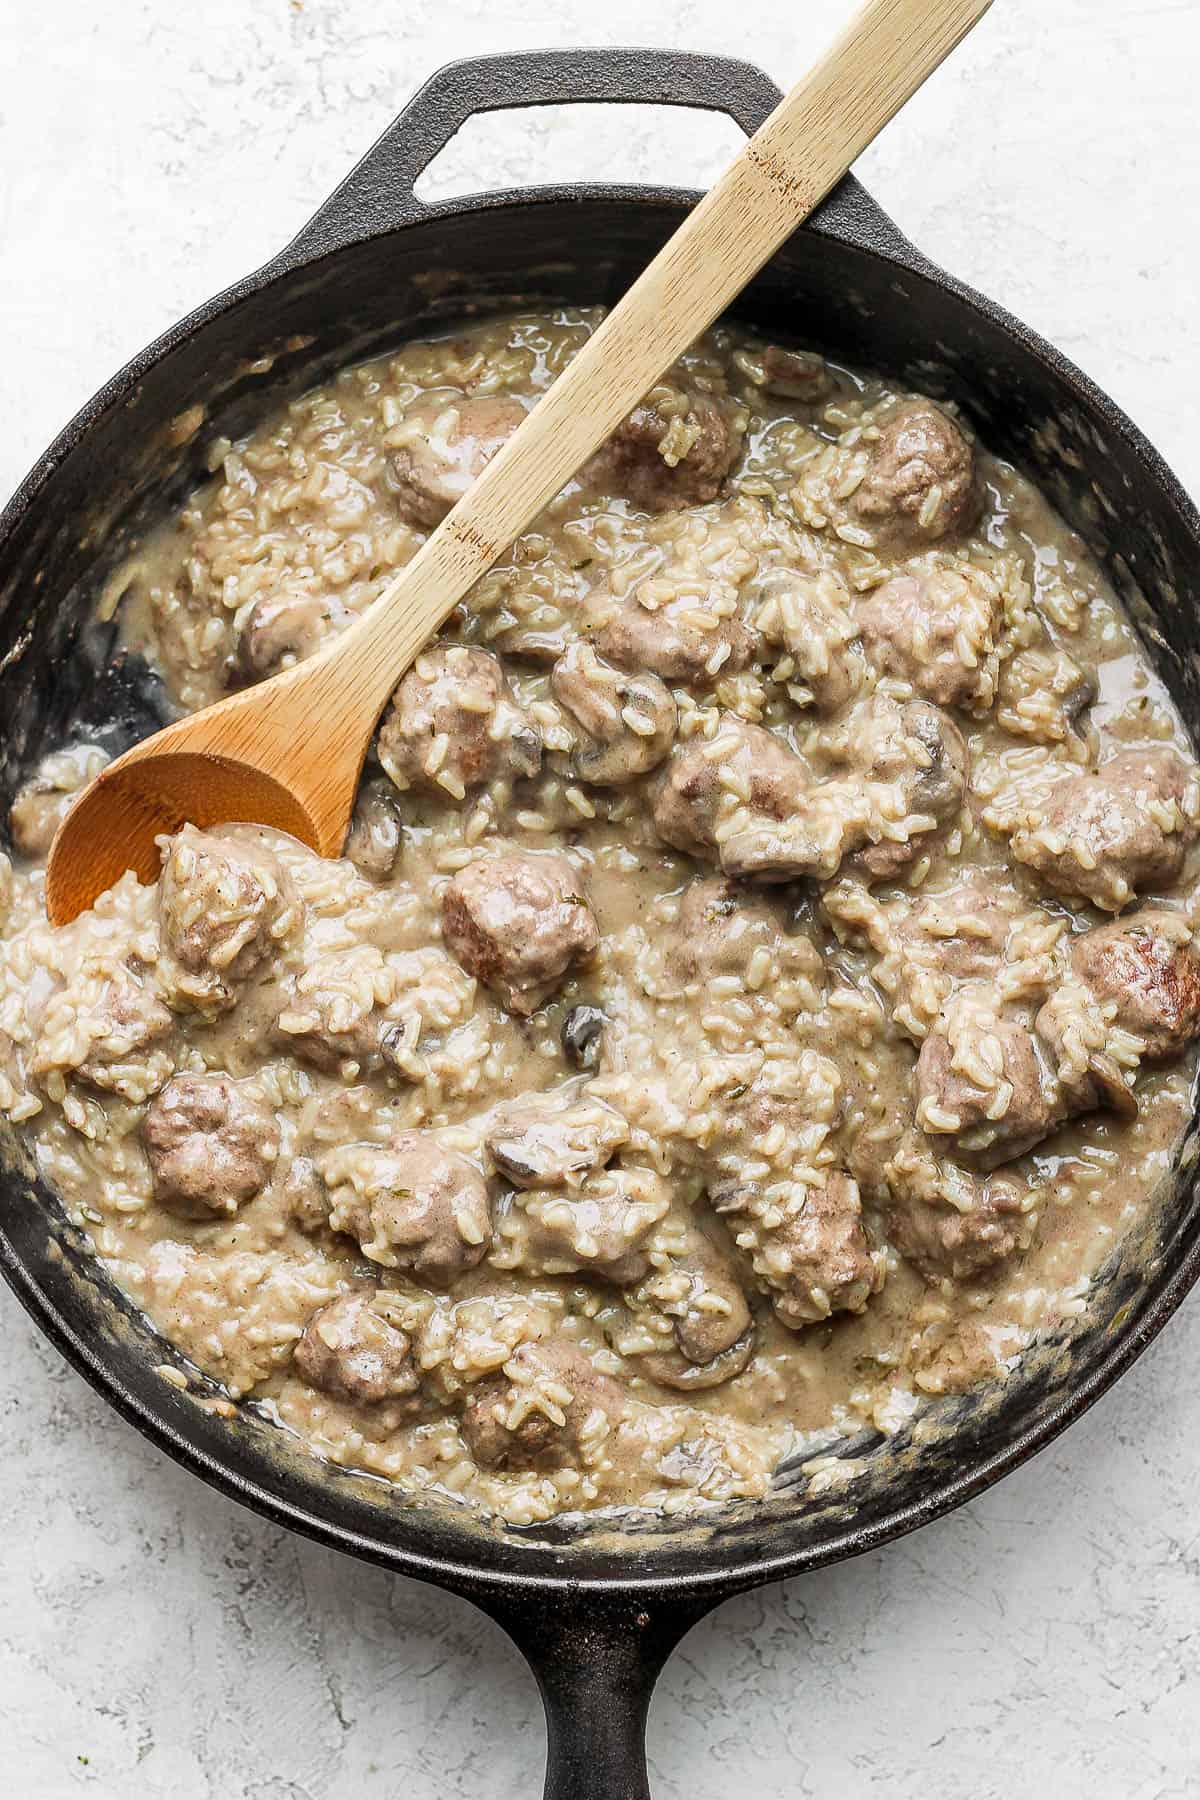 Meatballs and rice in a cast iron skillet.